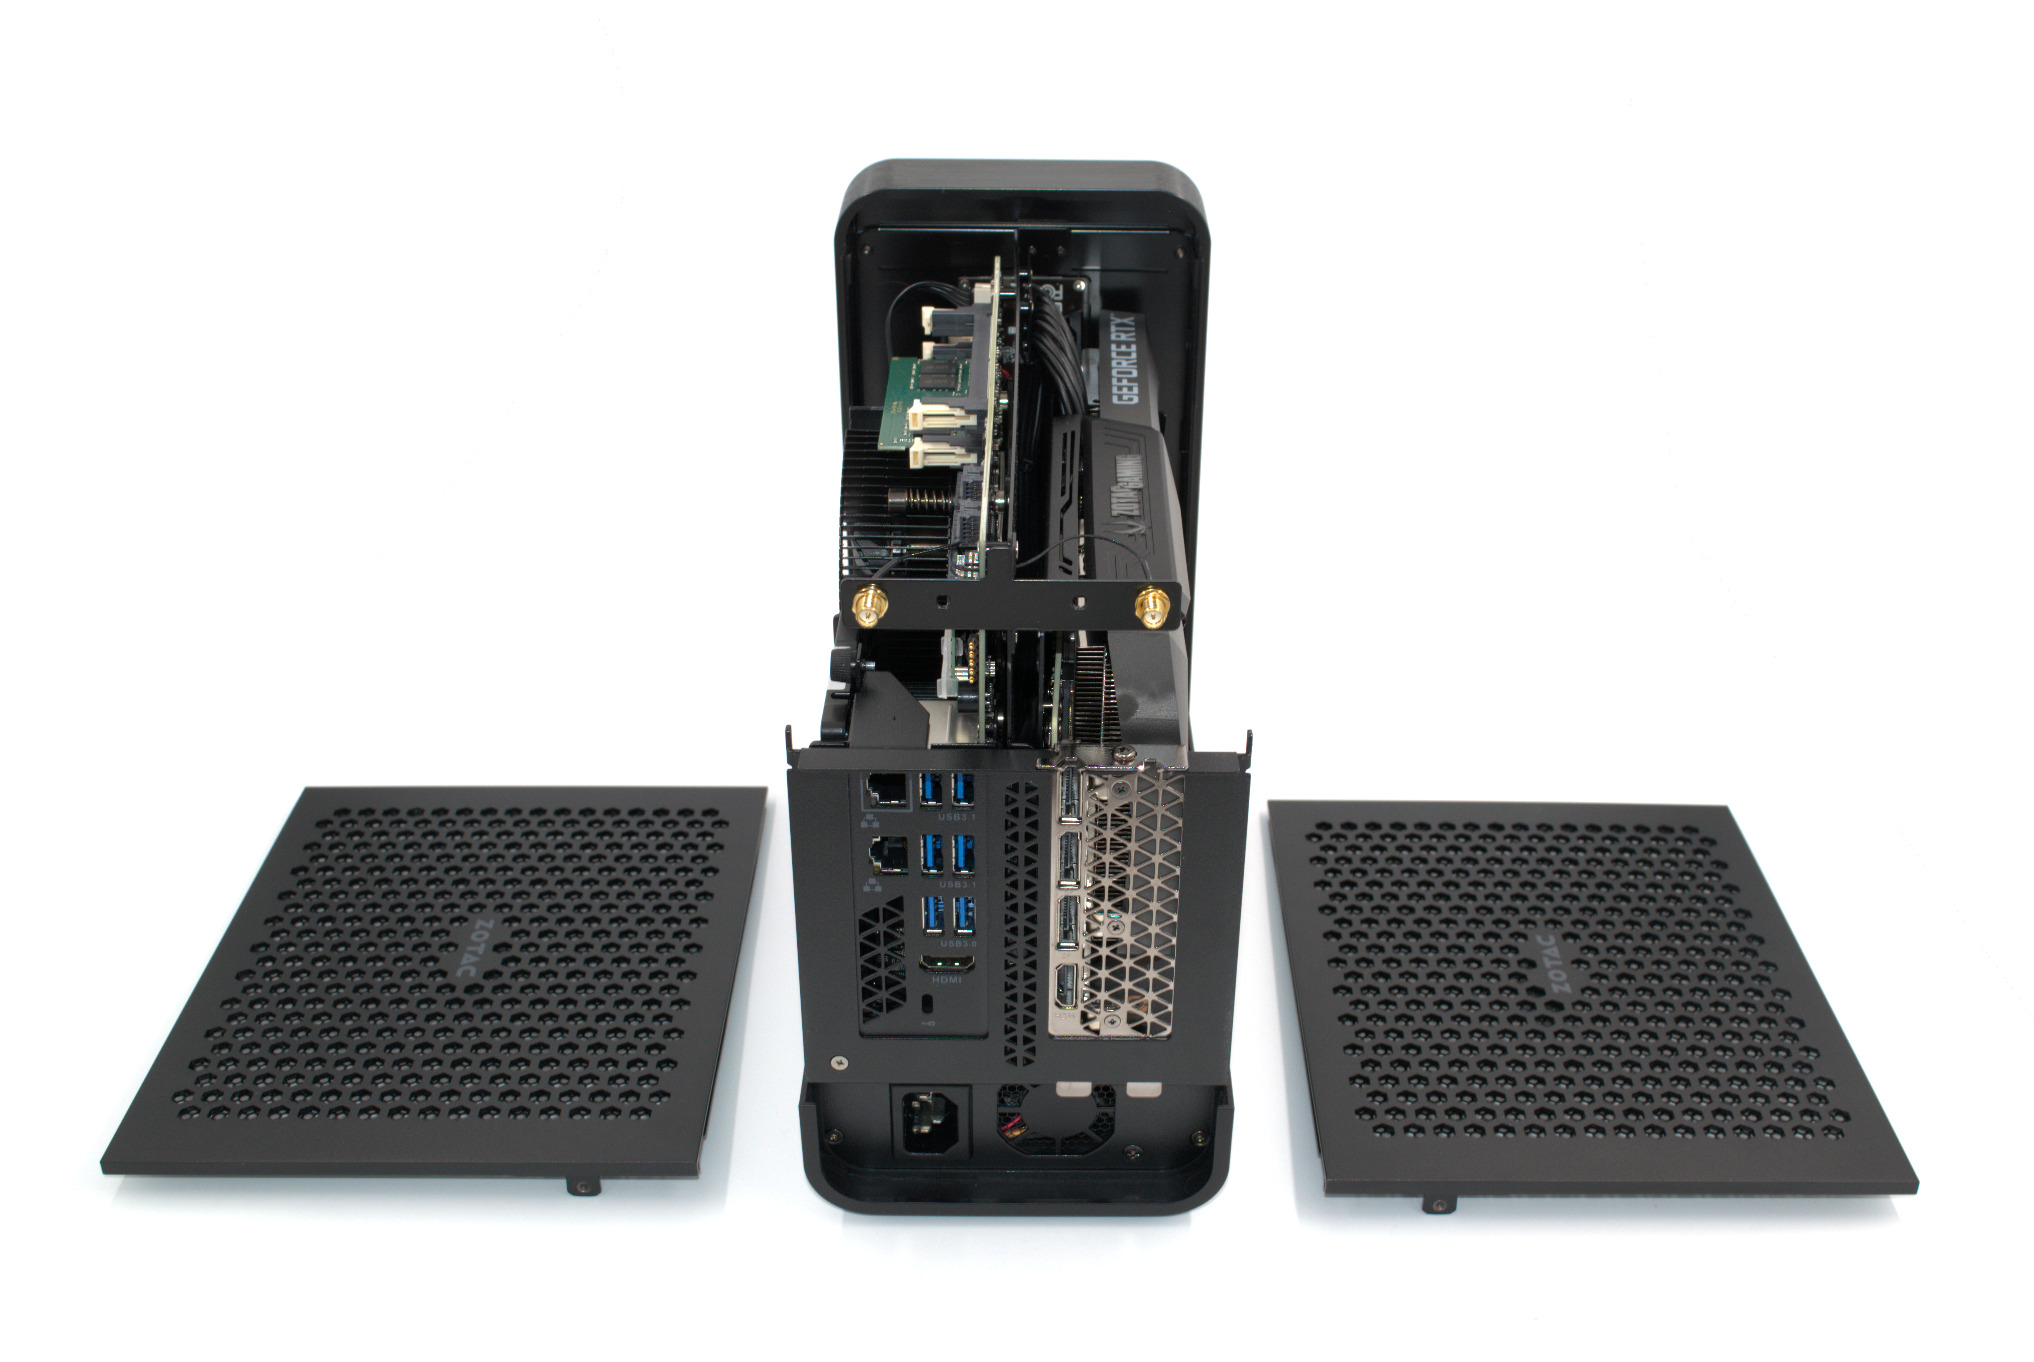 Ontdek Stereotype lied Zotac ZBOX MAGNUS ONE SFF Gaming PC Review: Desktop Comet Lake Charges Up  with Ampere